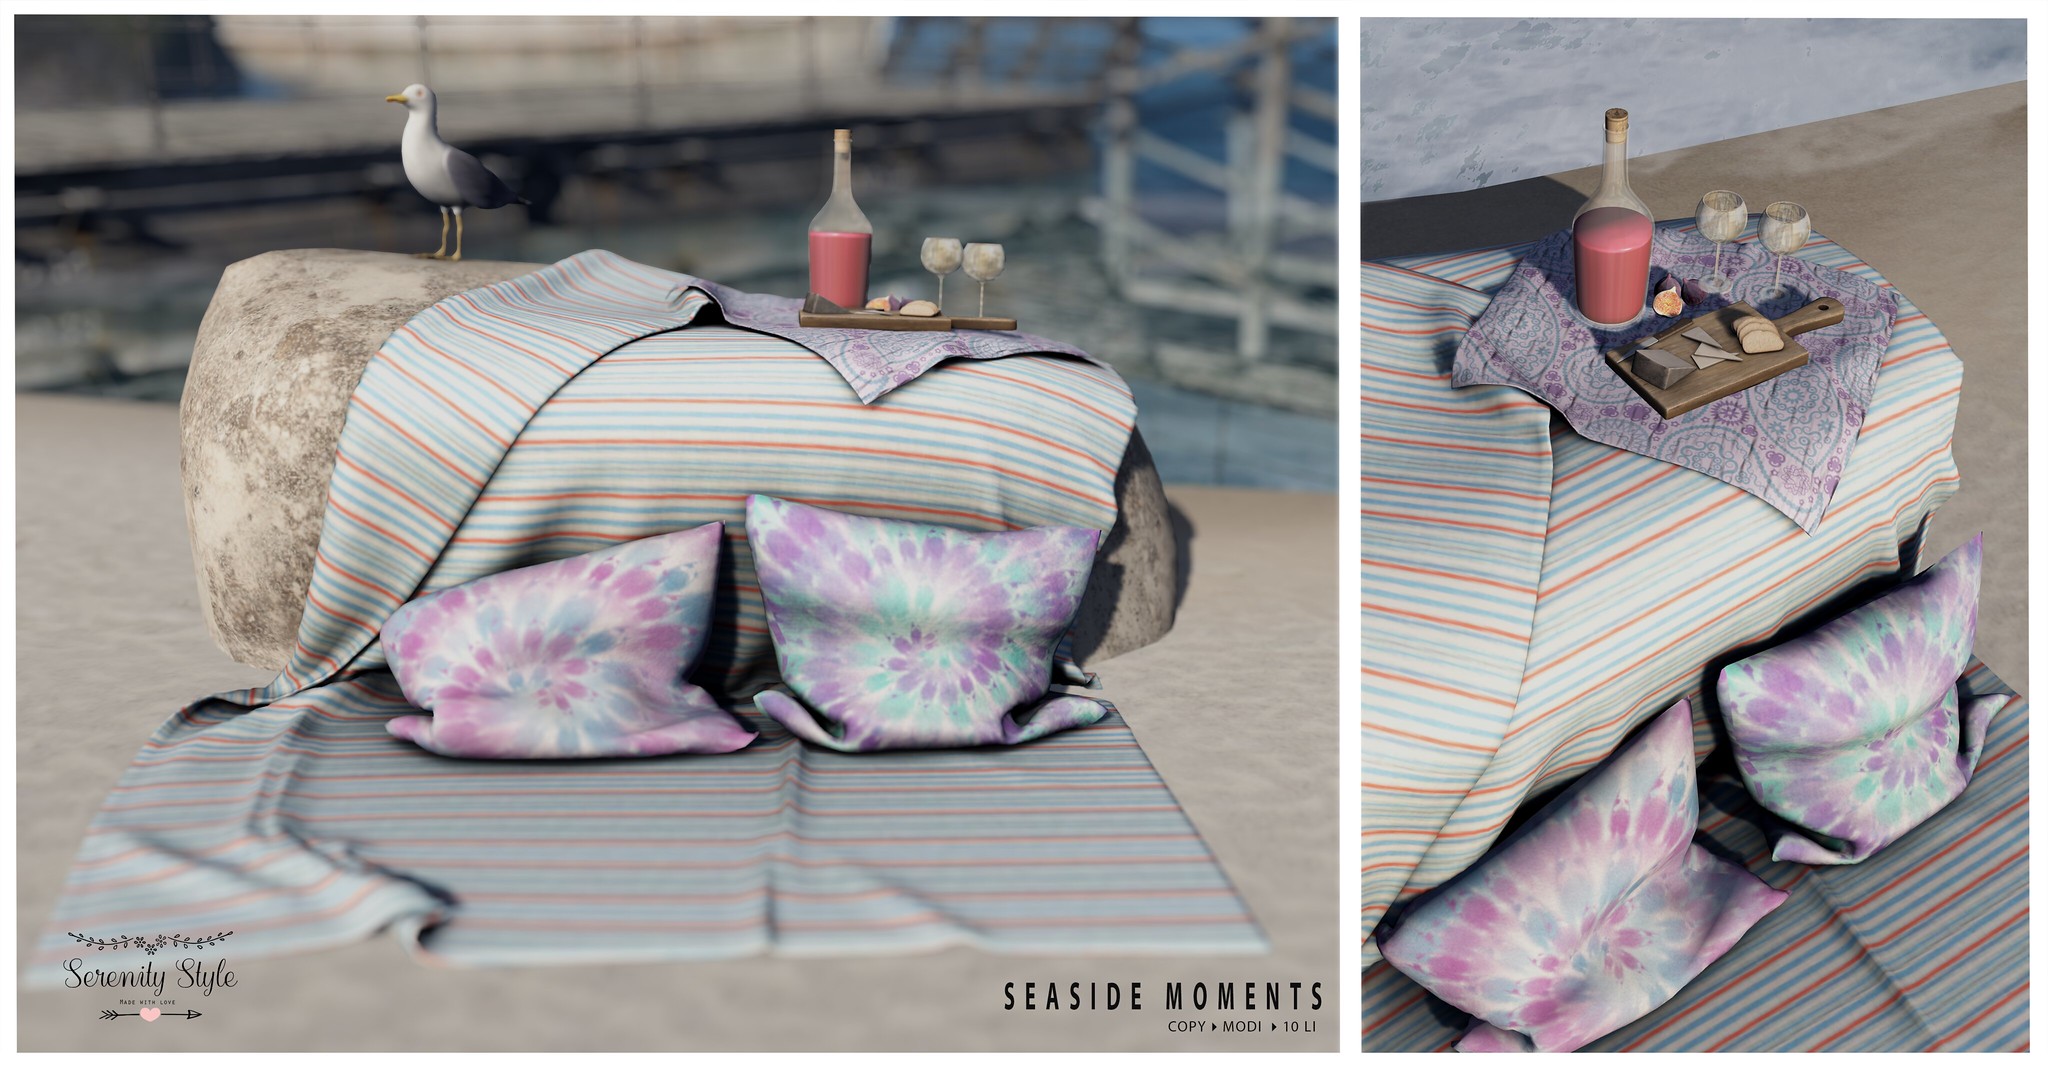 Serenity Style – Seaside Moments